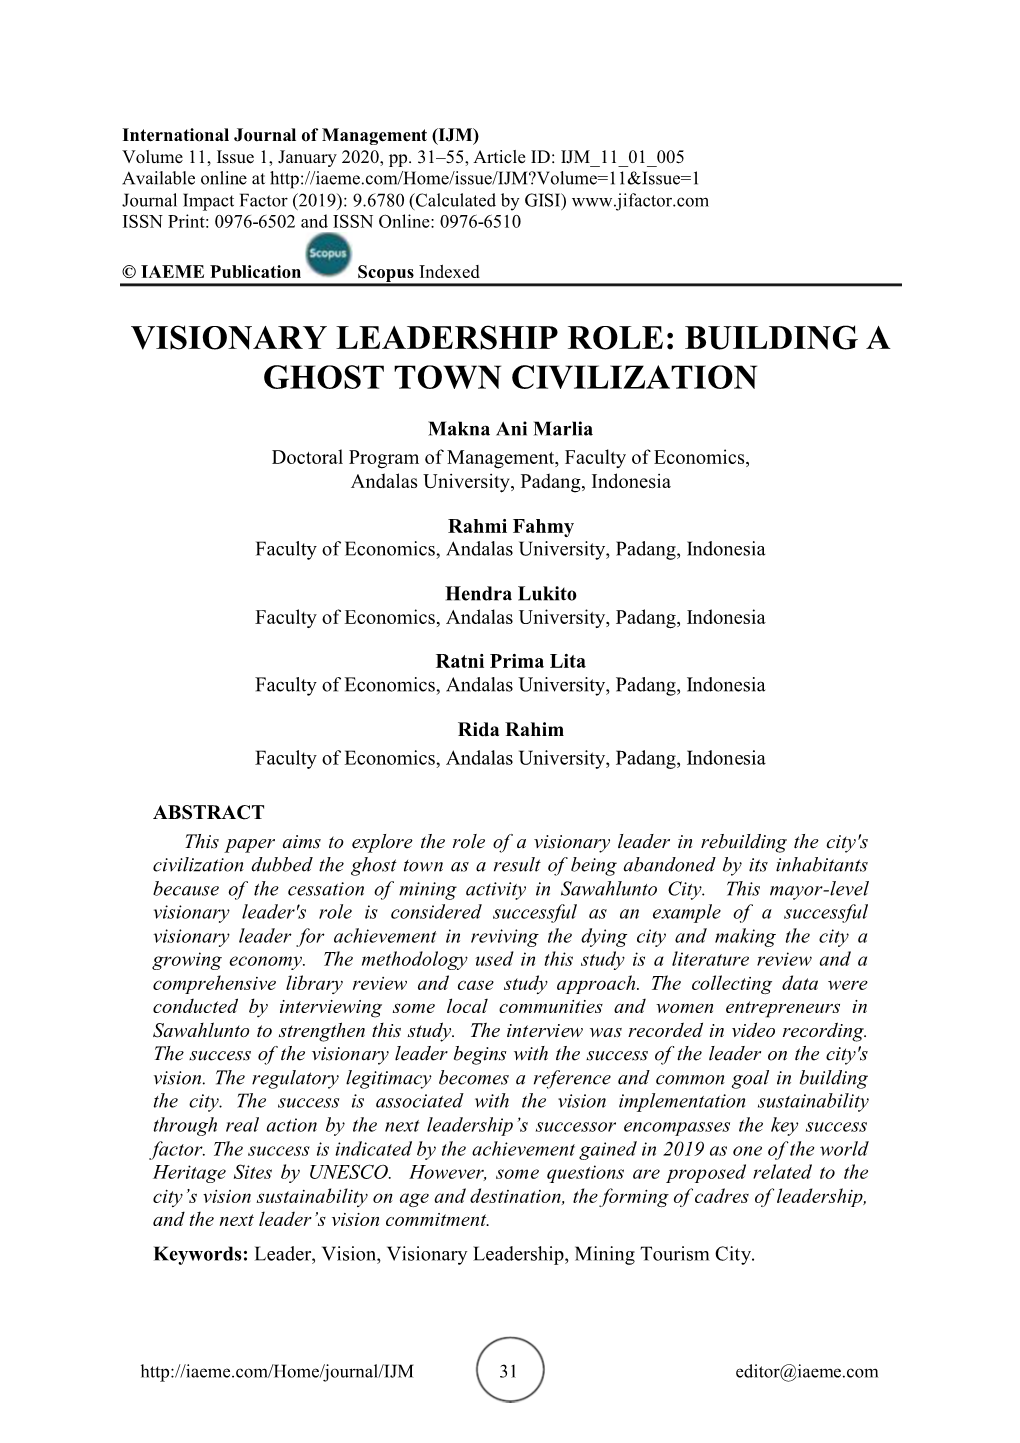 Visionary Leadership Role: Building a Ghost Town Civilization